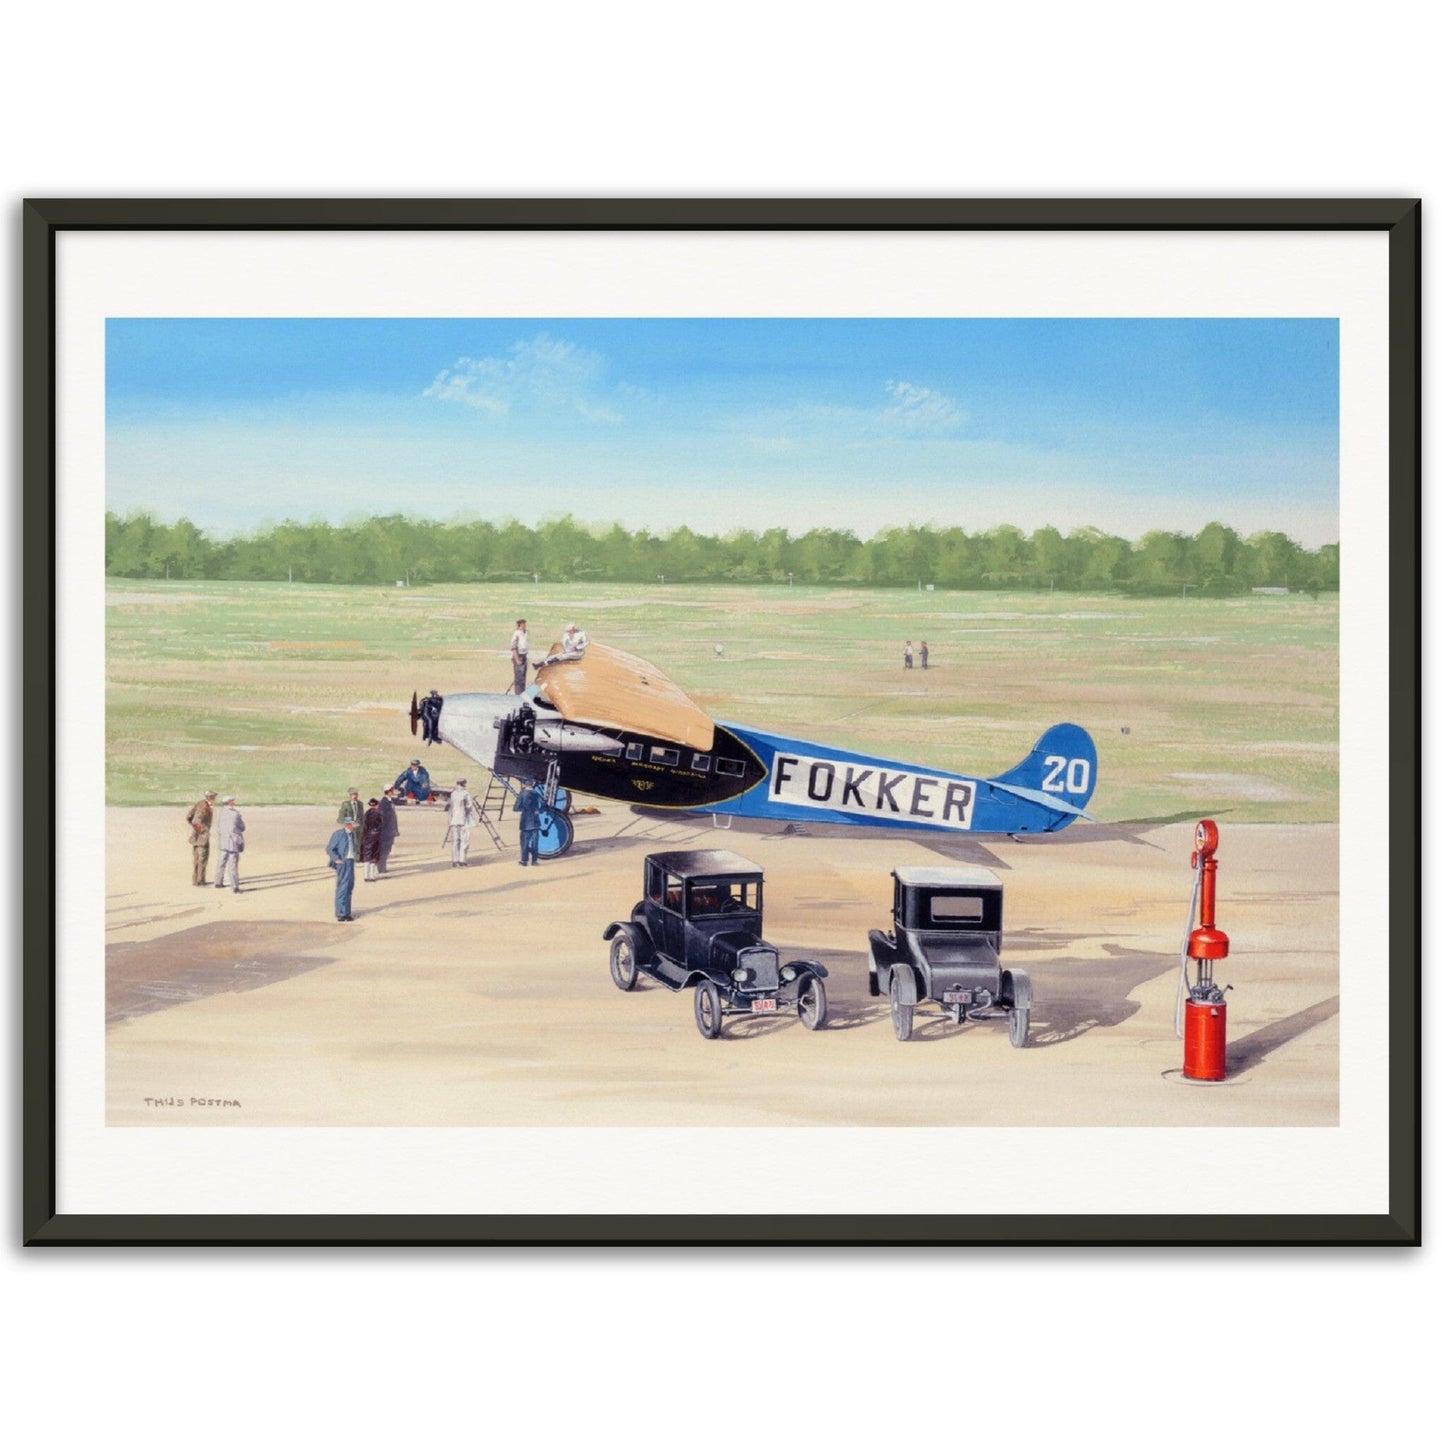 Thijs Postma - Poster - Fokker F.7/3m During Ford Reliability Tour - Metal Frame Poster - Metal Frame TP Aviation Art 45x60 cm / 18x24″ 